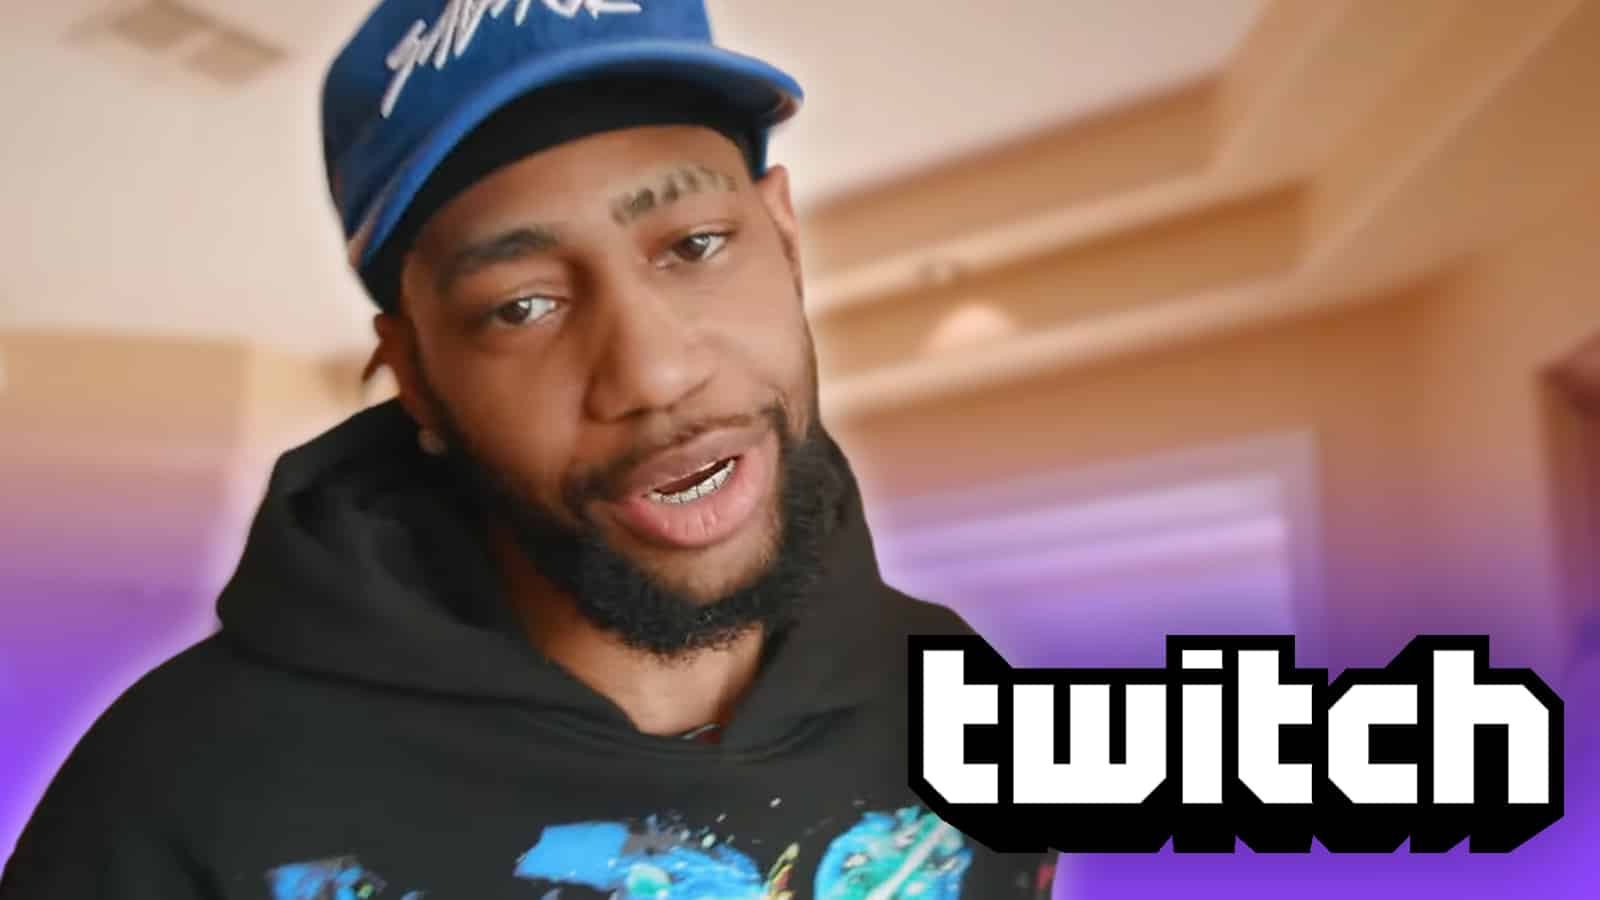 Daequan is returning to Twitch streaming in September.